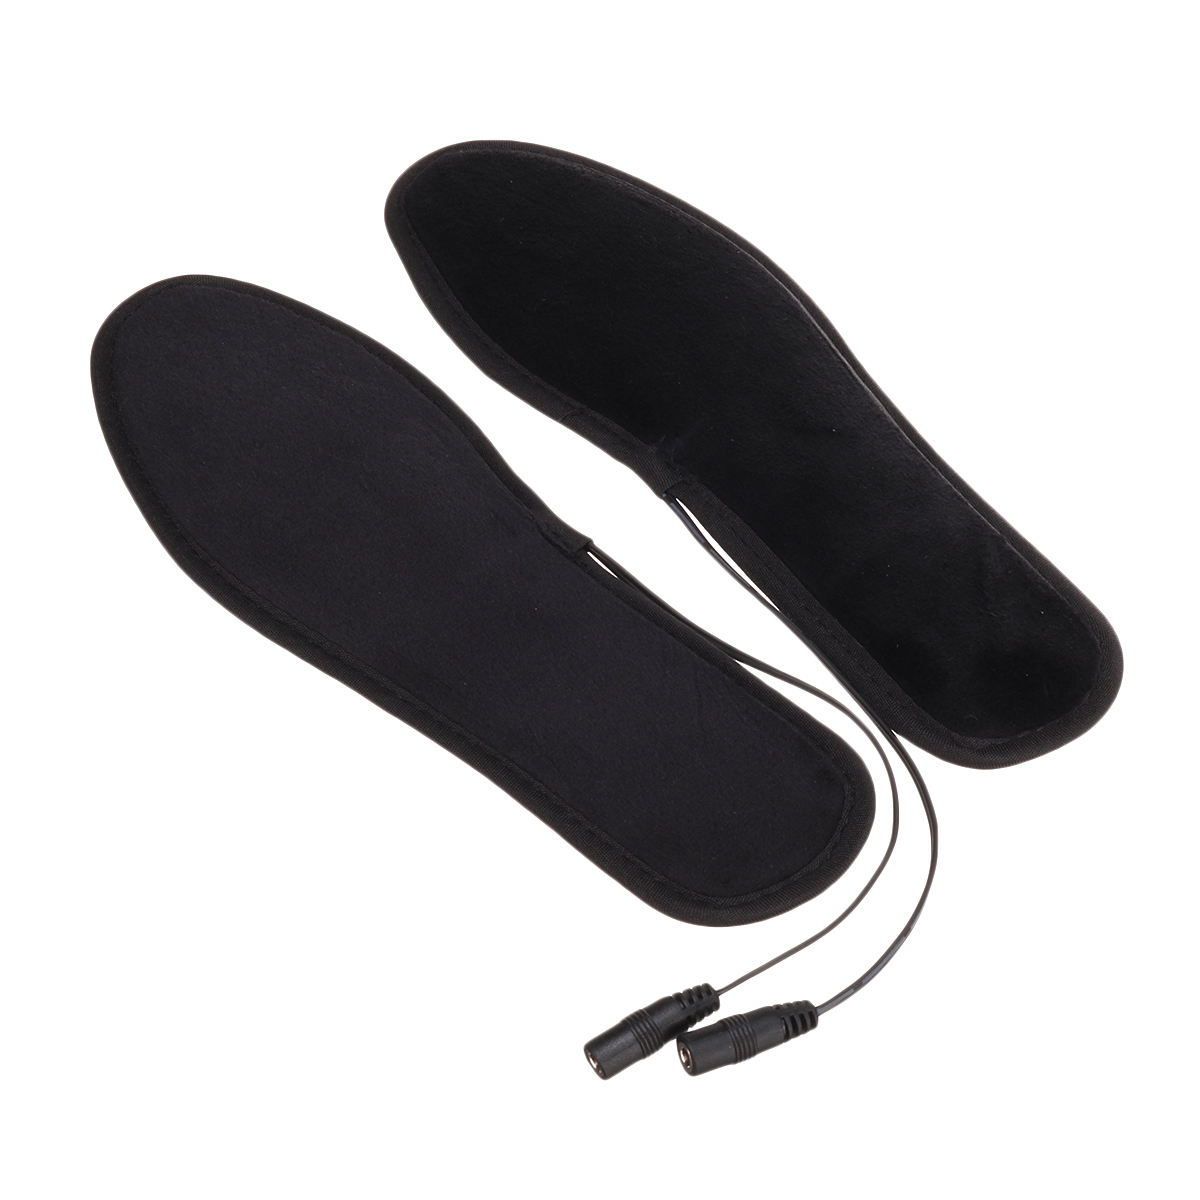 USB-Electric-Powered-Heated-Shoe-Insoles-Film-Heater-Feet-Warm-Foot-Socks-Pads-For-Camping-Mountaine-1931178-3